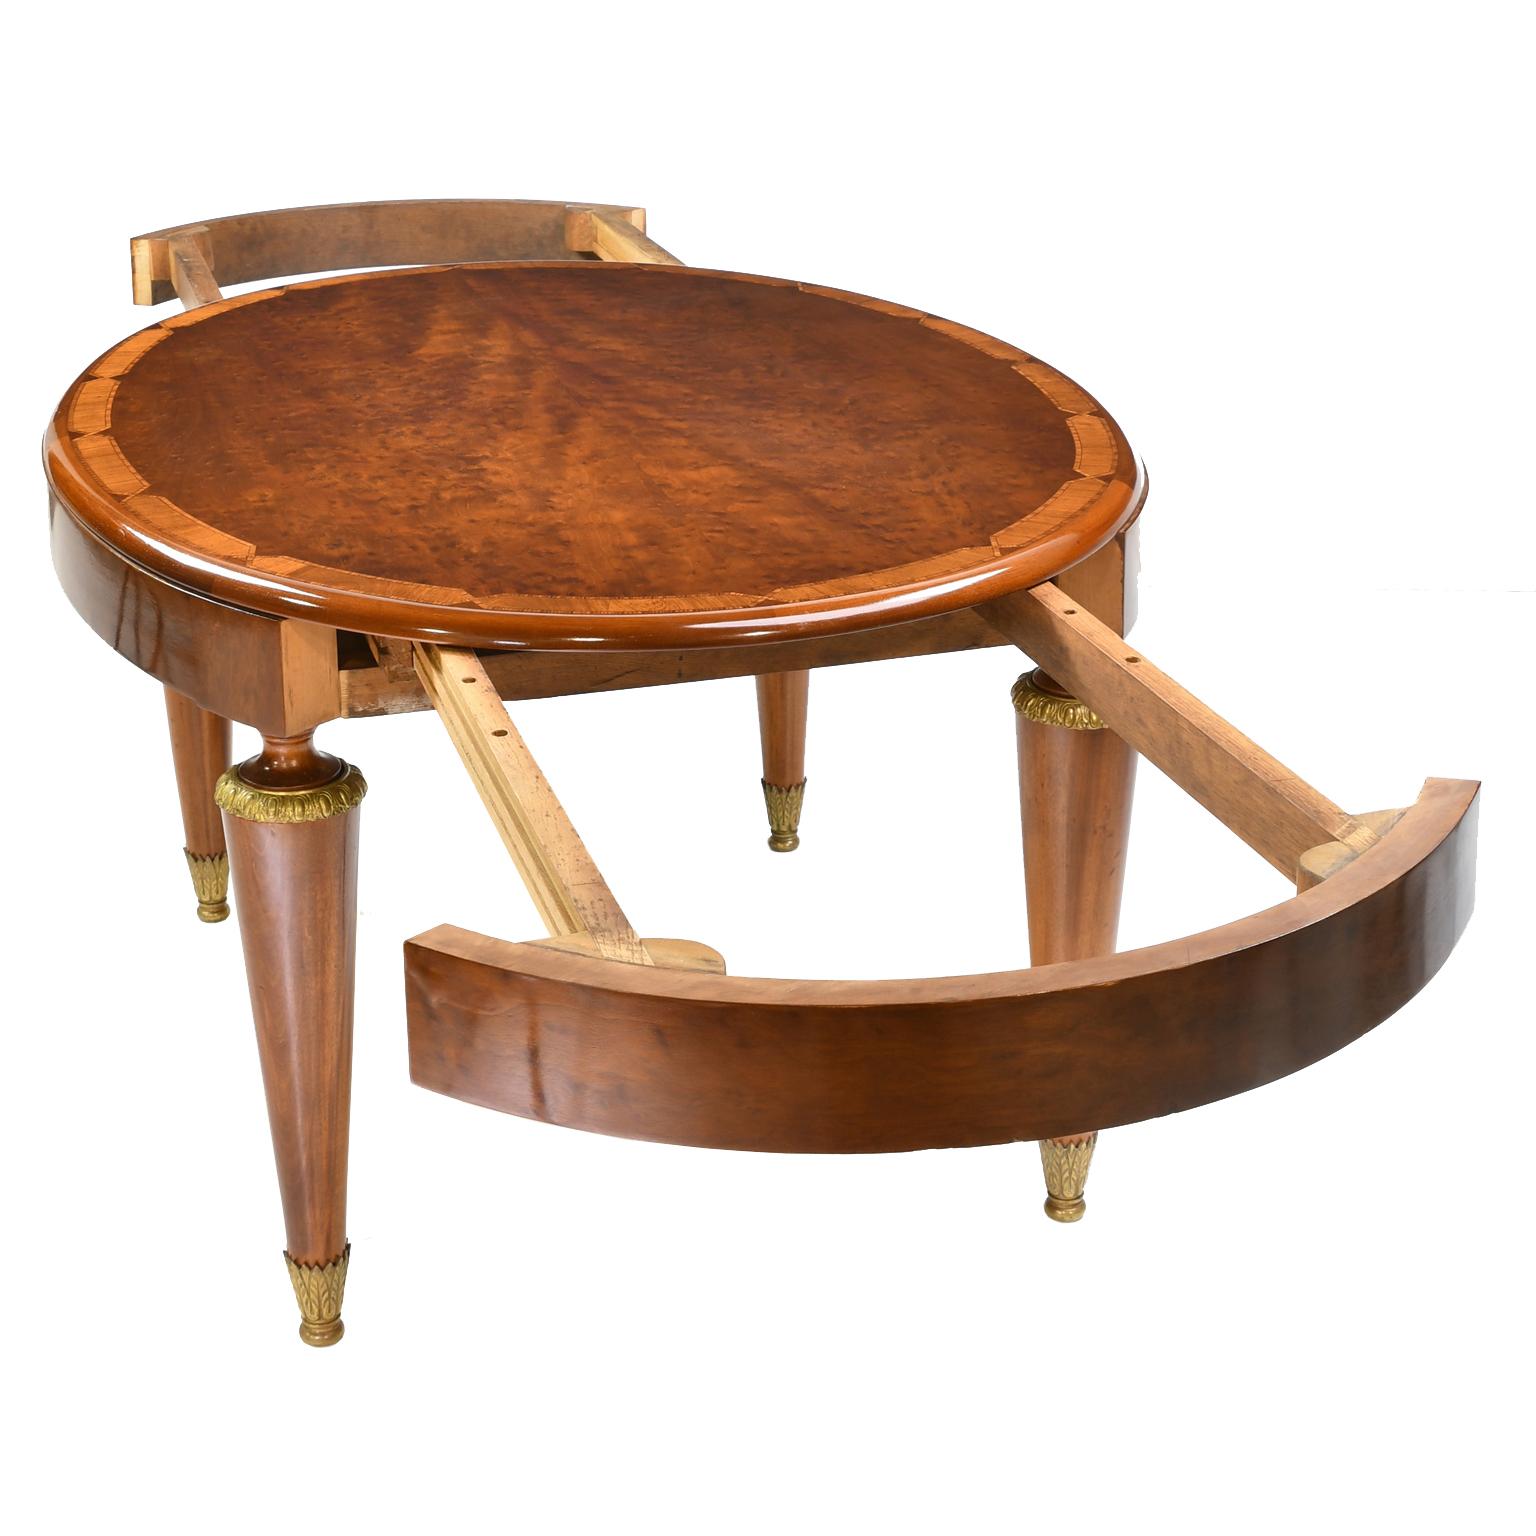 Antique European Art Deco Oval Dining Table in Polished Mahogany and Maple 1